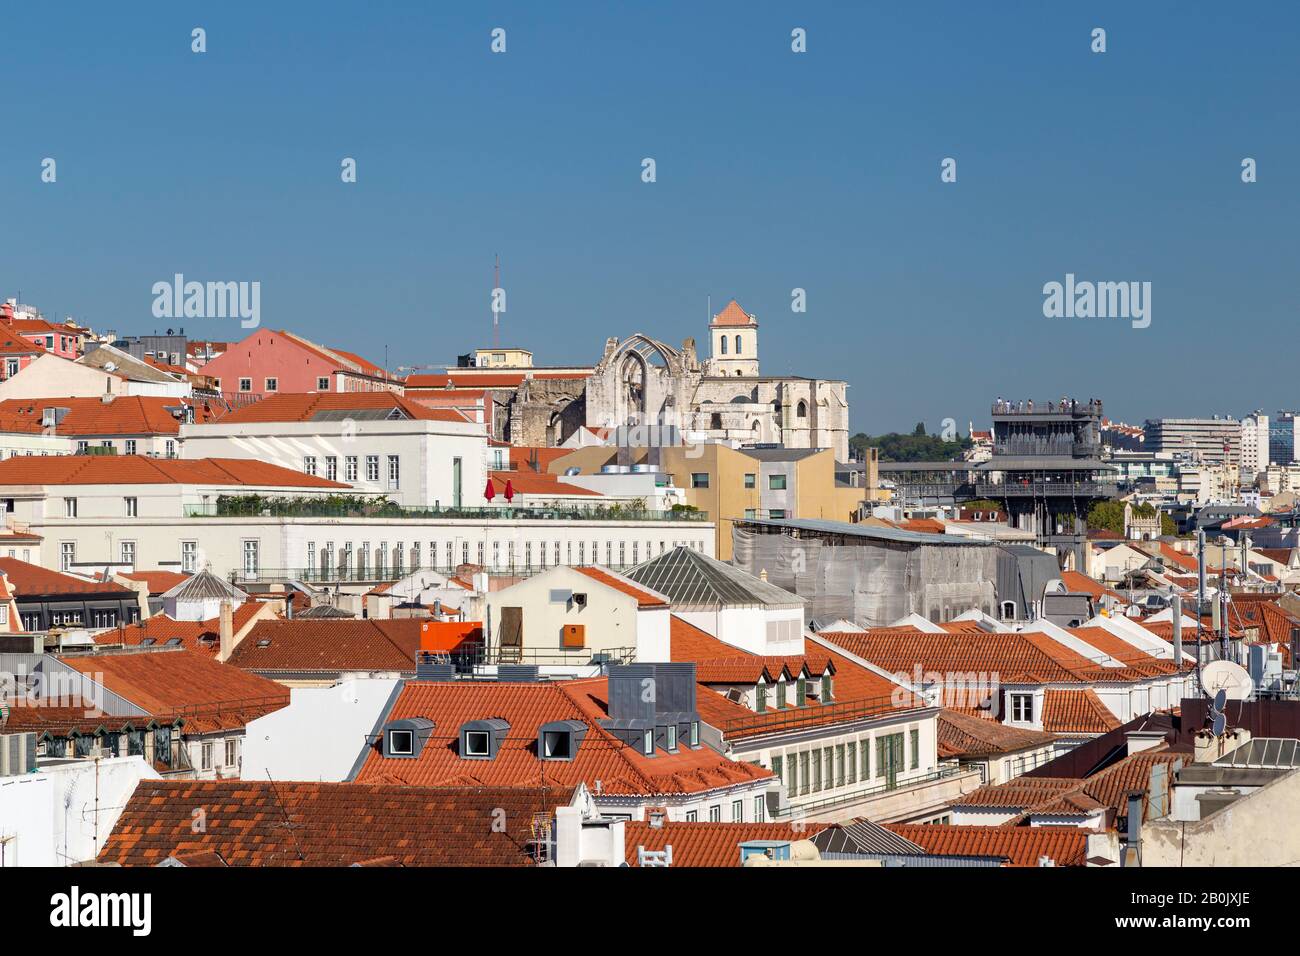 View of the historic and medieval Convento do Carmo (Carmo Convent), Elevador de Santa Justa and old buildings in downtown Lisbon, Portugal. Stock Photo